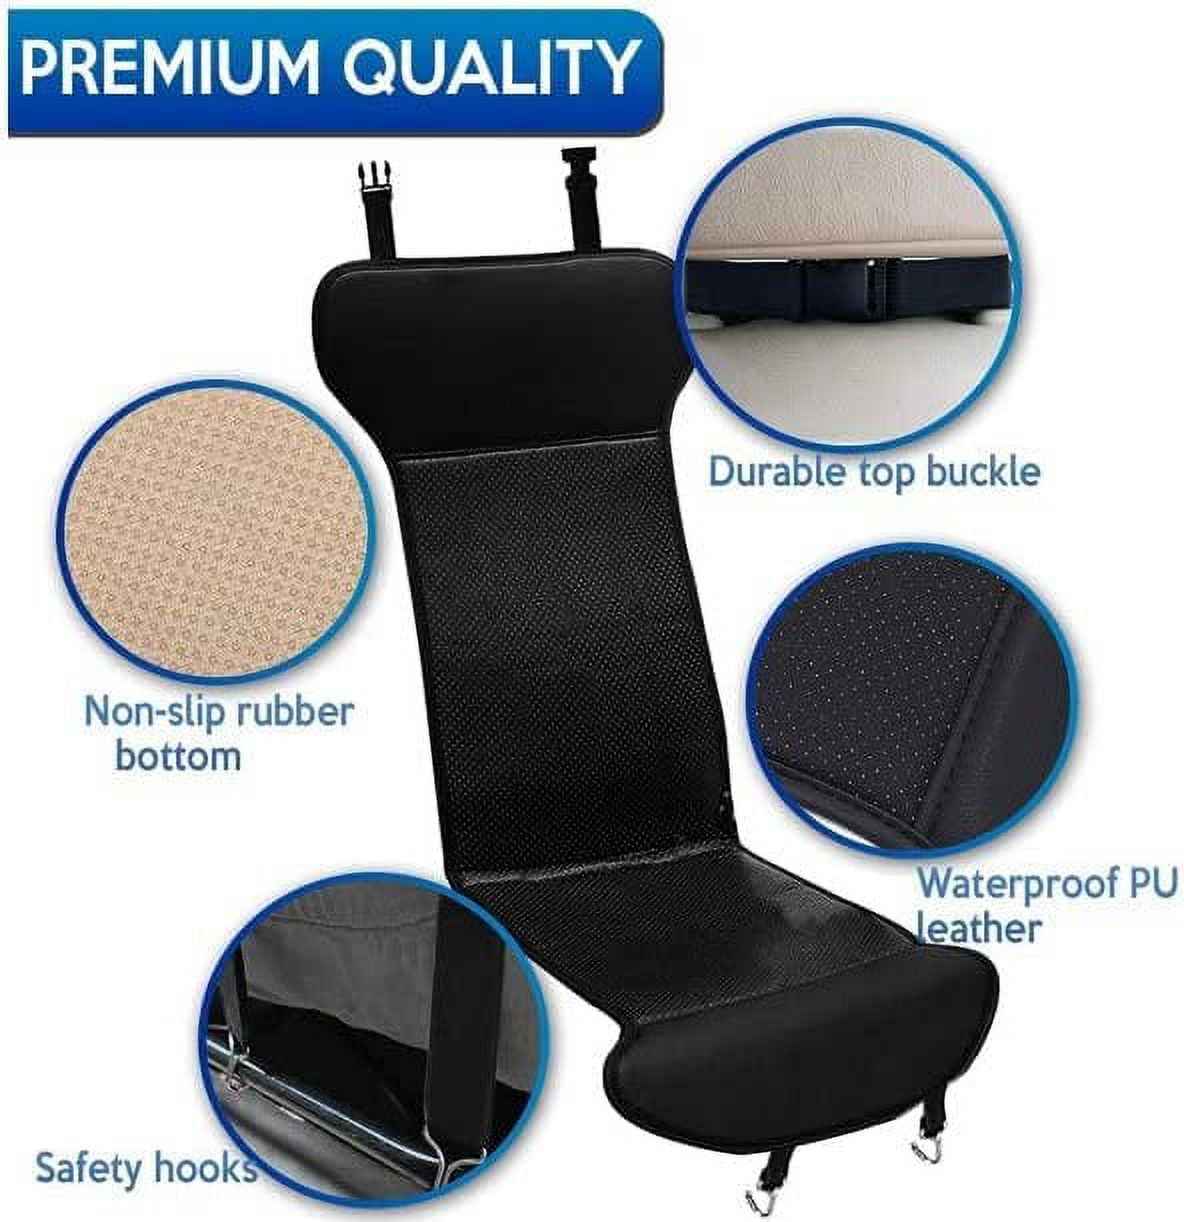 Zone Tech Car Travel Seat Cover Cushion Premium Quality Classic Black  Automotive Comfortable Seat Cushion Perfect for Cold Weather and Winter  Driving